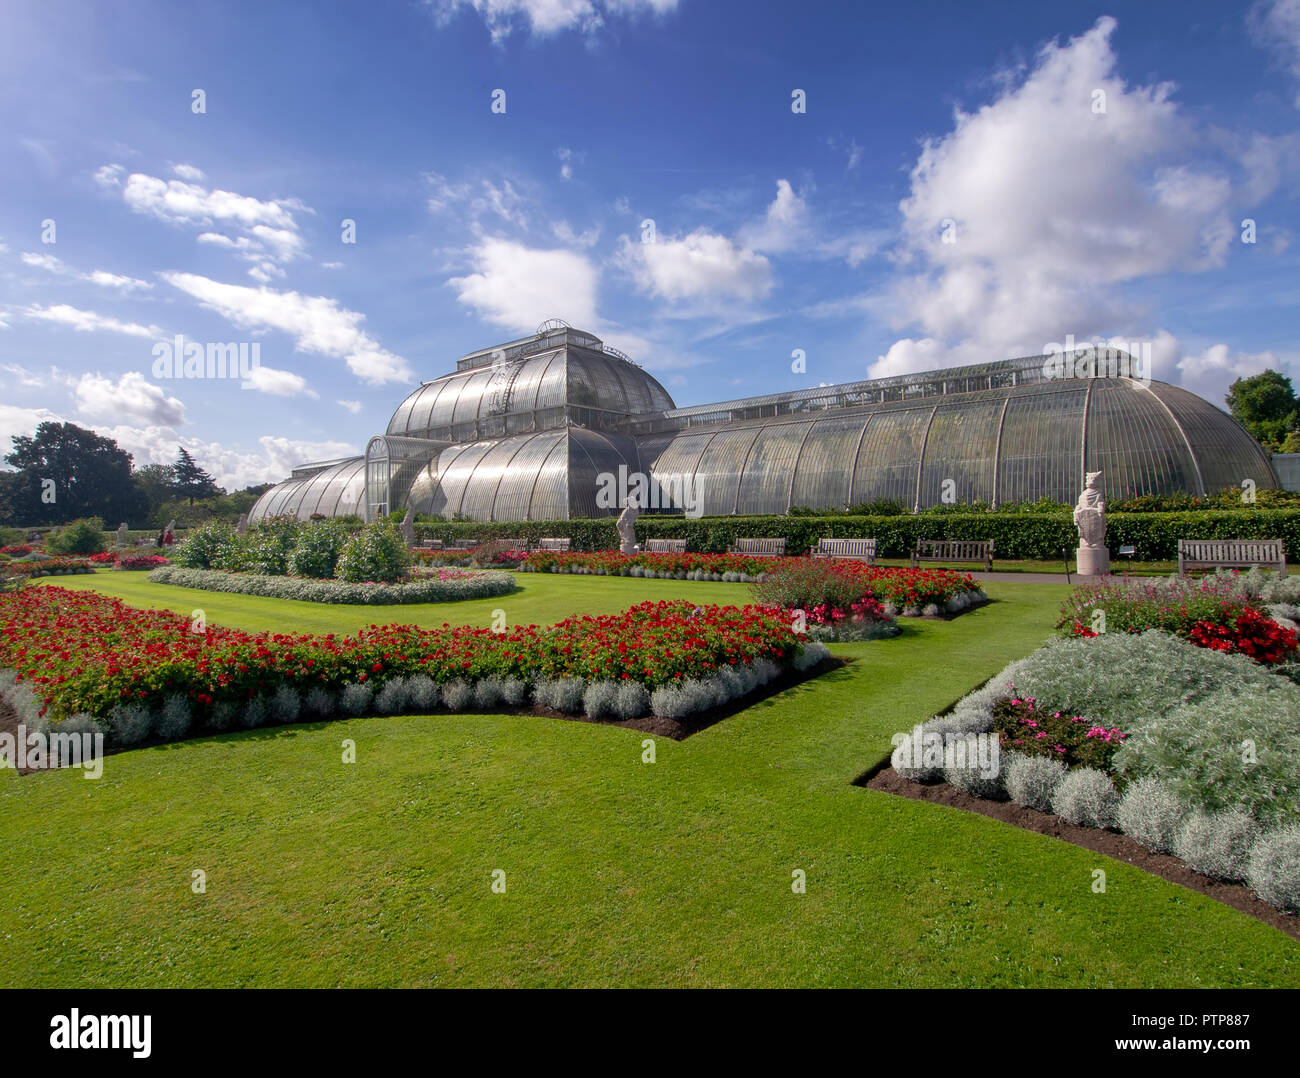 KEW GARDENS, LONDON, UK SEPTEMBER 15, 2018: The Palm House at Kew Gardens, London, basks in late summer sun. It specializes in growing of palms and other tropical and subtropical plants. Stock Photo